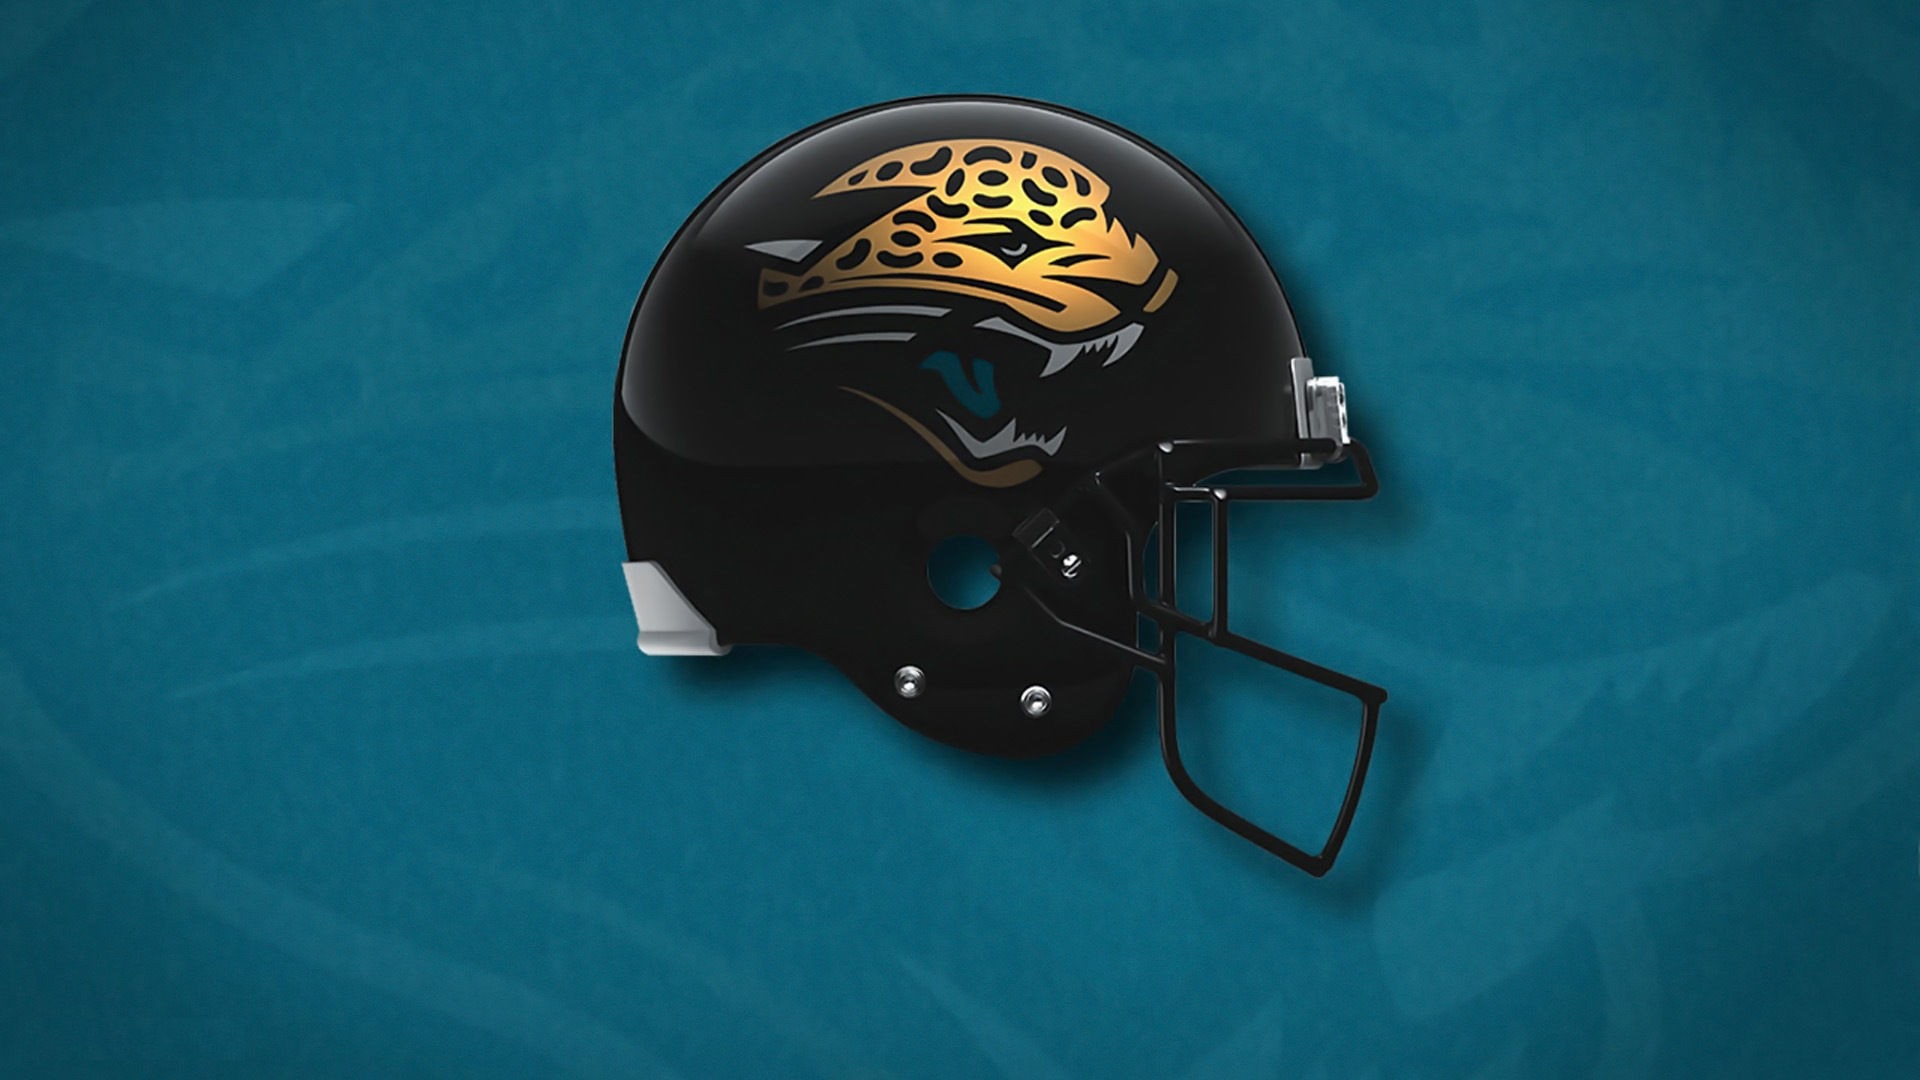 Jacksonville Jaguars NFL Desktop Wallpapers with high-resolution 1920x1080 pixel. You can use this wallpaper for your Mac or Windows Desktop Background, iPhone, Android or Tablet and another Smartphone device